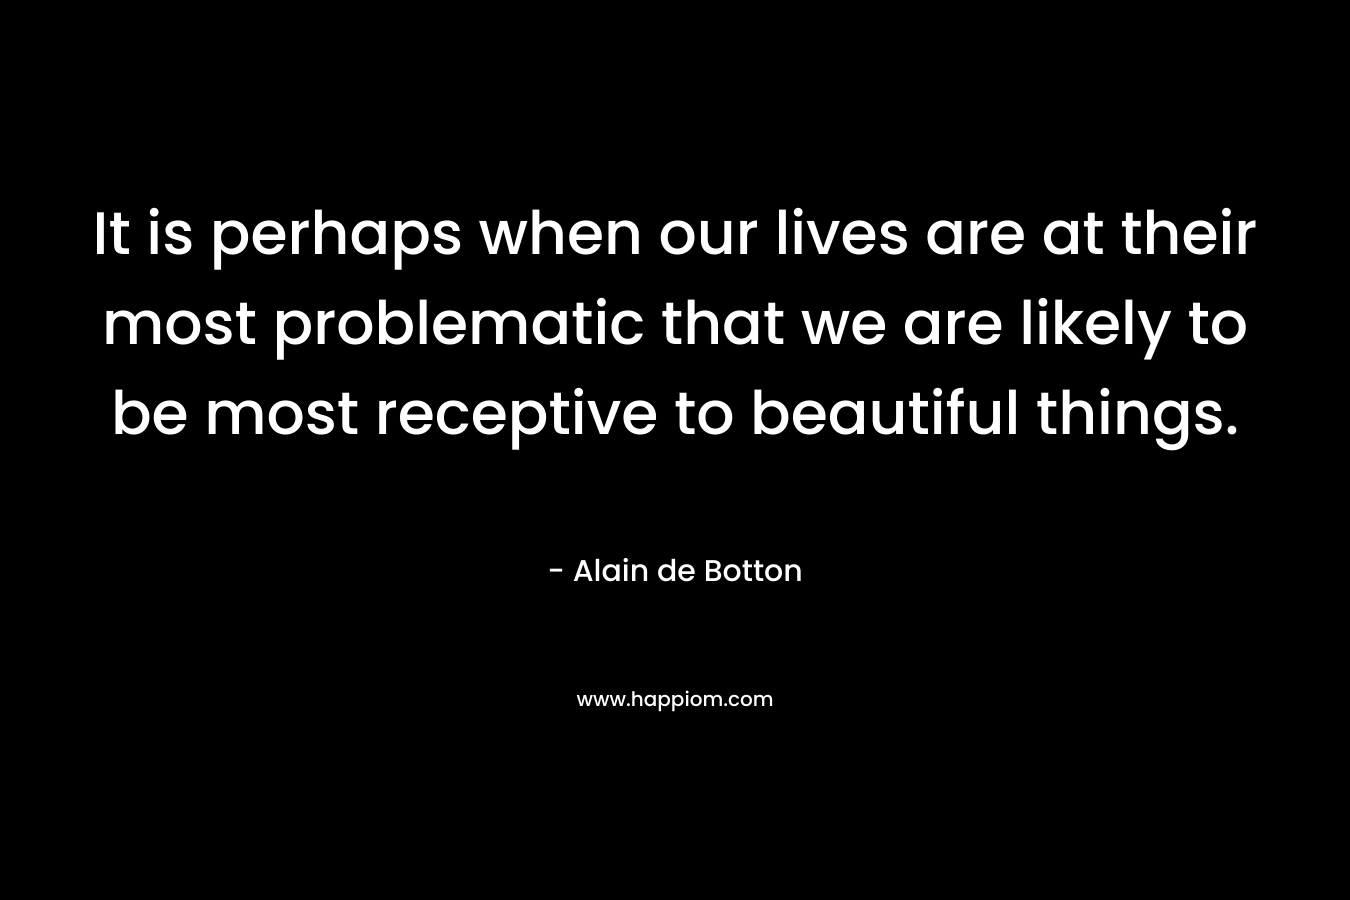 It is perhaps when our lives are at their most problematic that we are likely to be most receptive to beautiful things.